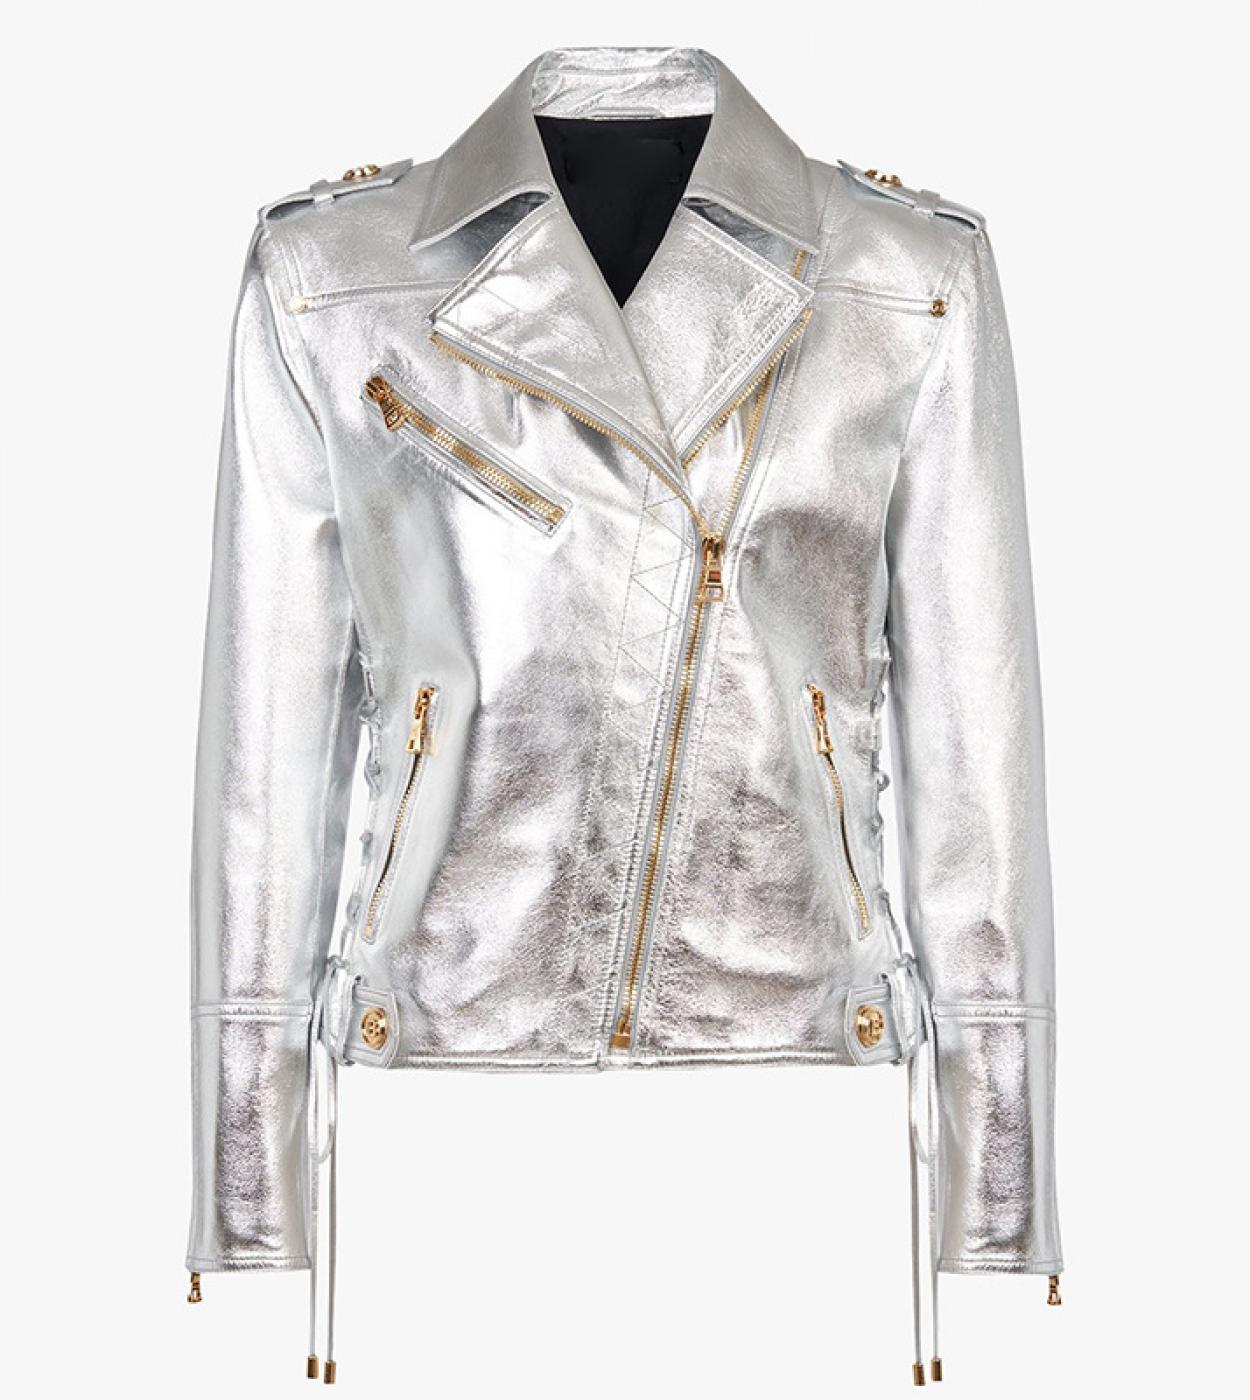 New Designer Silver Pu Leather Jacket Women Lacing Up Metallic Synthetic Faux Leather Motorcycle Biker Jackets 2022 High